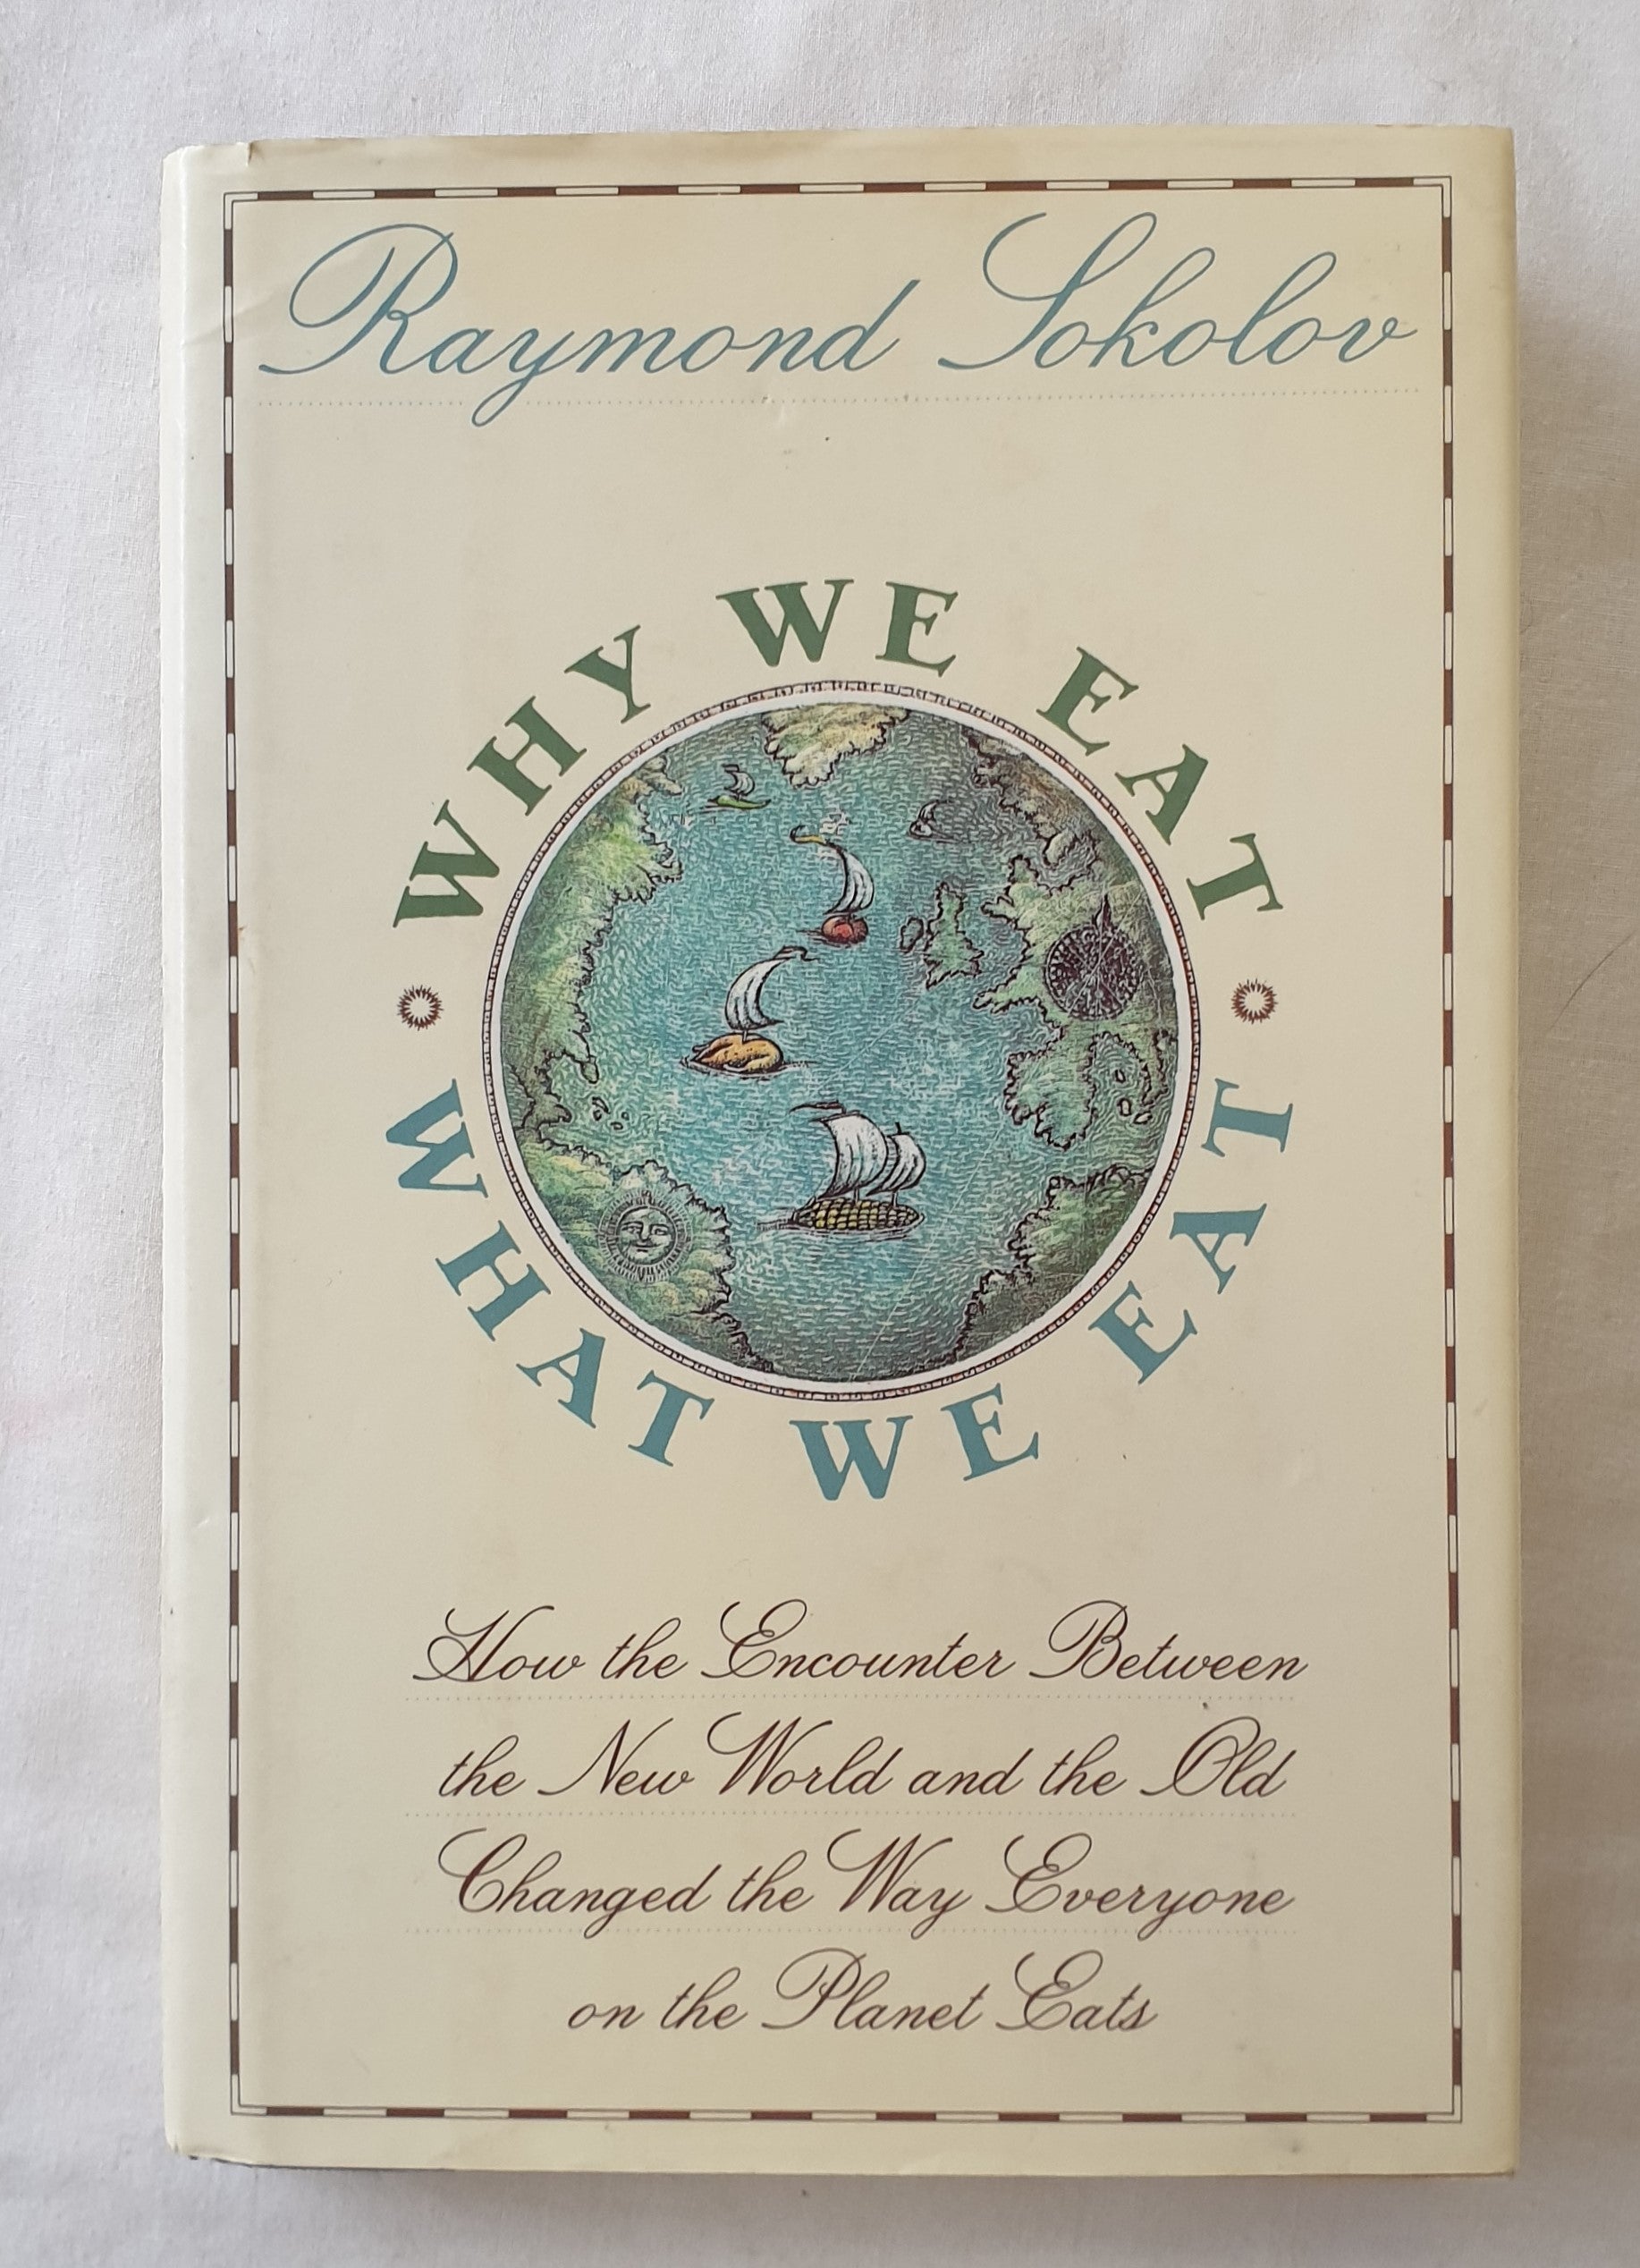 Why We Eat What We Eat by Raymond Sokolov